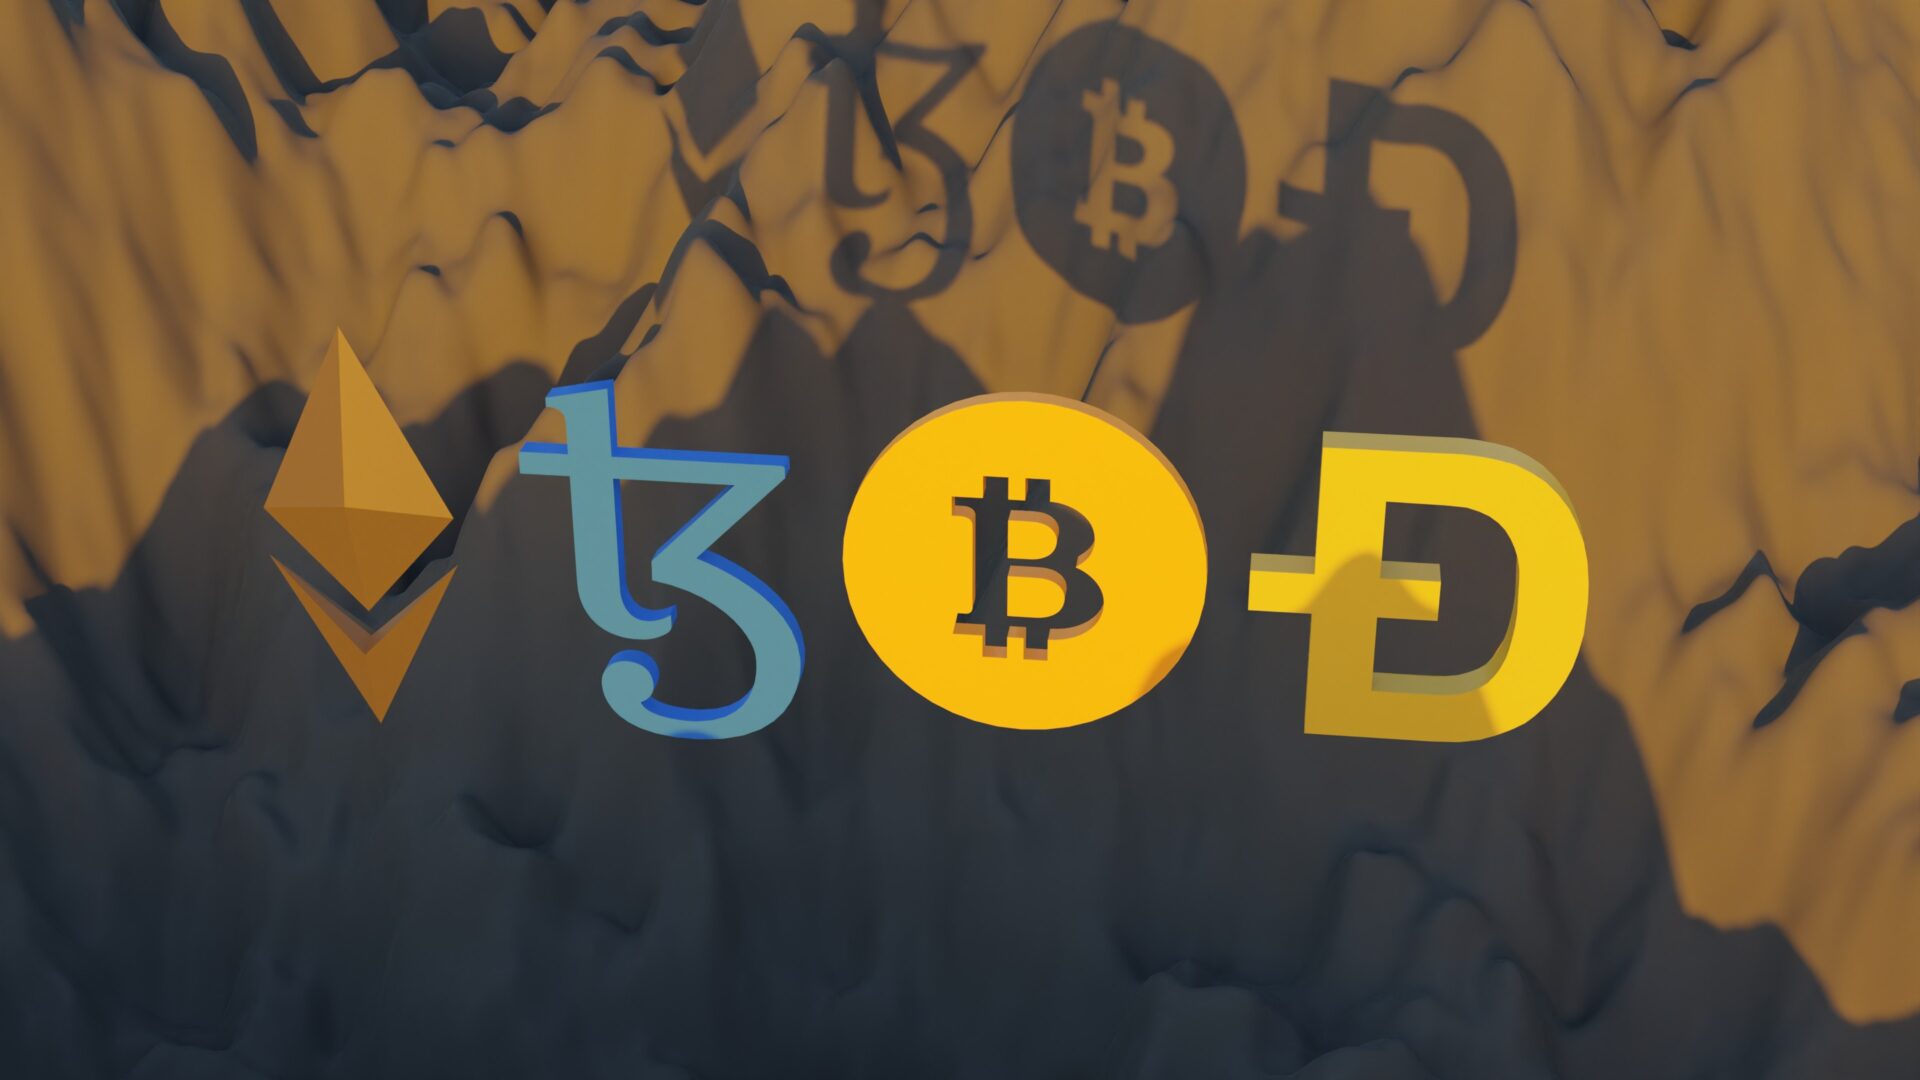 3D illustration of Tezos coin, bitcoin, Ehtereum, and dogecoin. Tezos is a blockchain designed to evolve